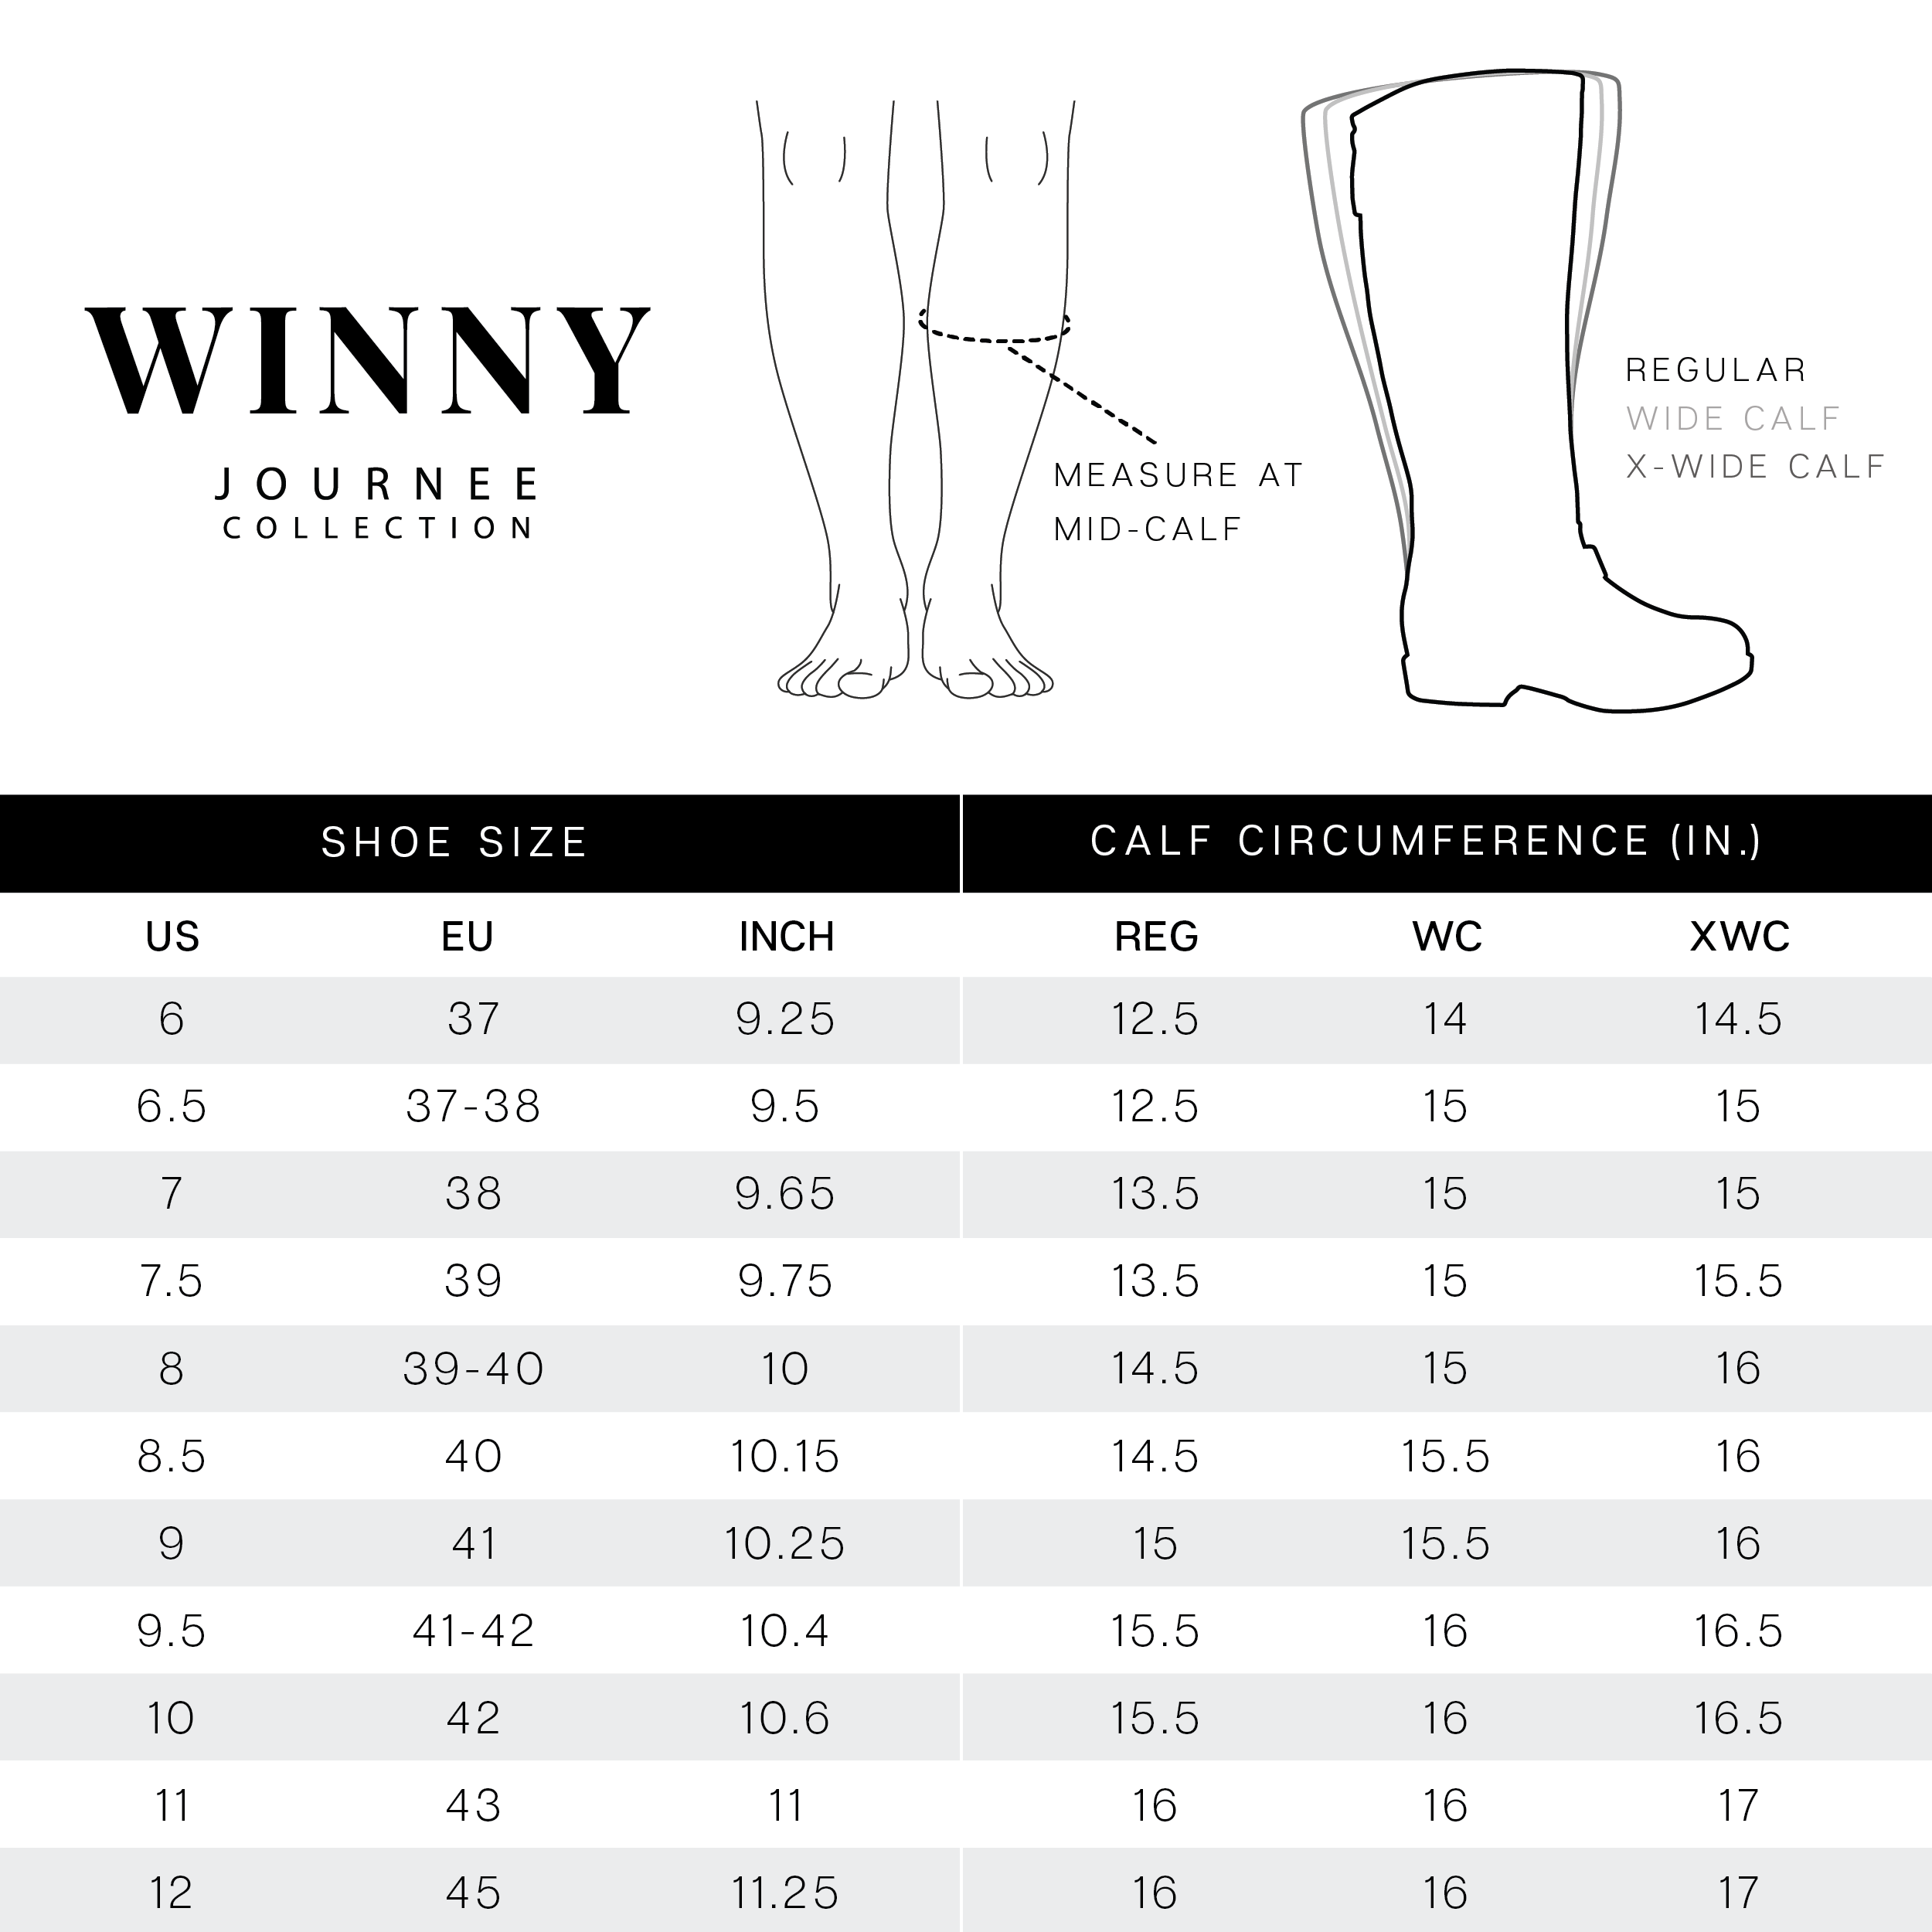 WINNY EXTRA WIDE CALF - Journee Collection